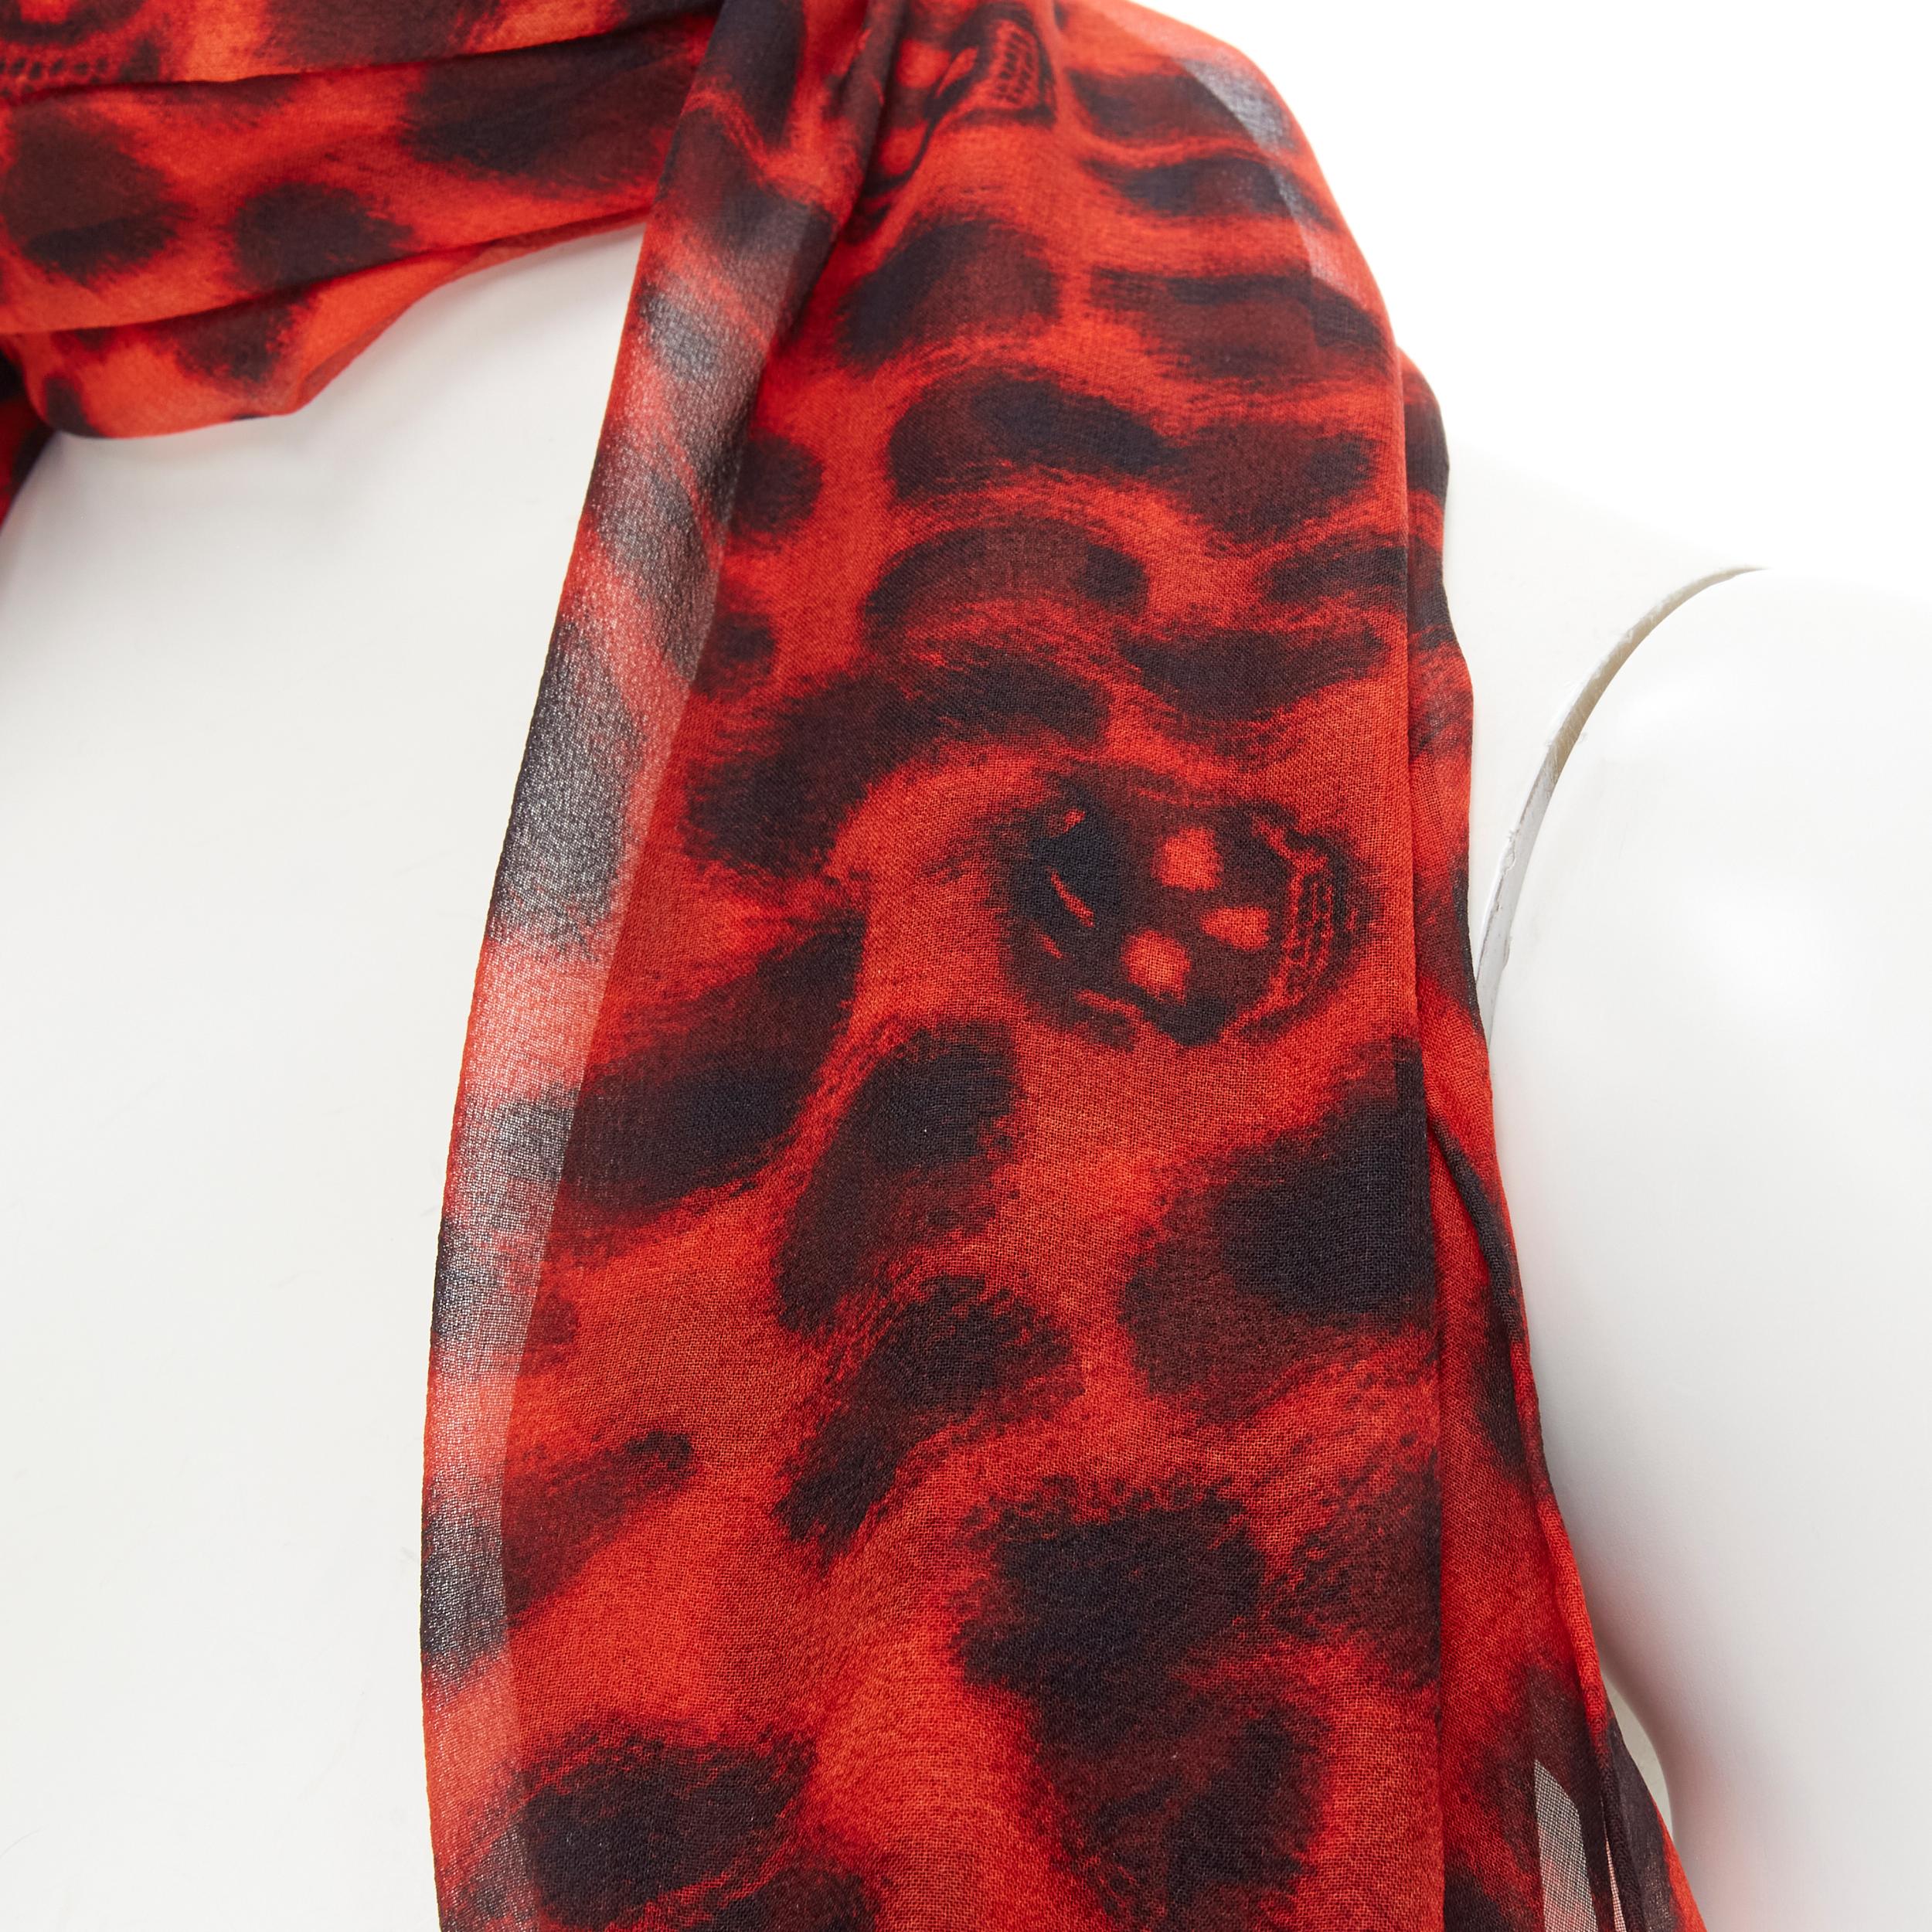 ALEXANDER MCQUEEN 100% silk red leopard spotted skull print scarf 
Reference: JNWG/A00005 
Brand: Alexander McQueen 
Designer: Alexander McQueen 
Material: Silk 
Color: Red 
Pattern: Leopard 
Made in: Italy 

CONDITION: 
Condition: Excellent, this